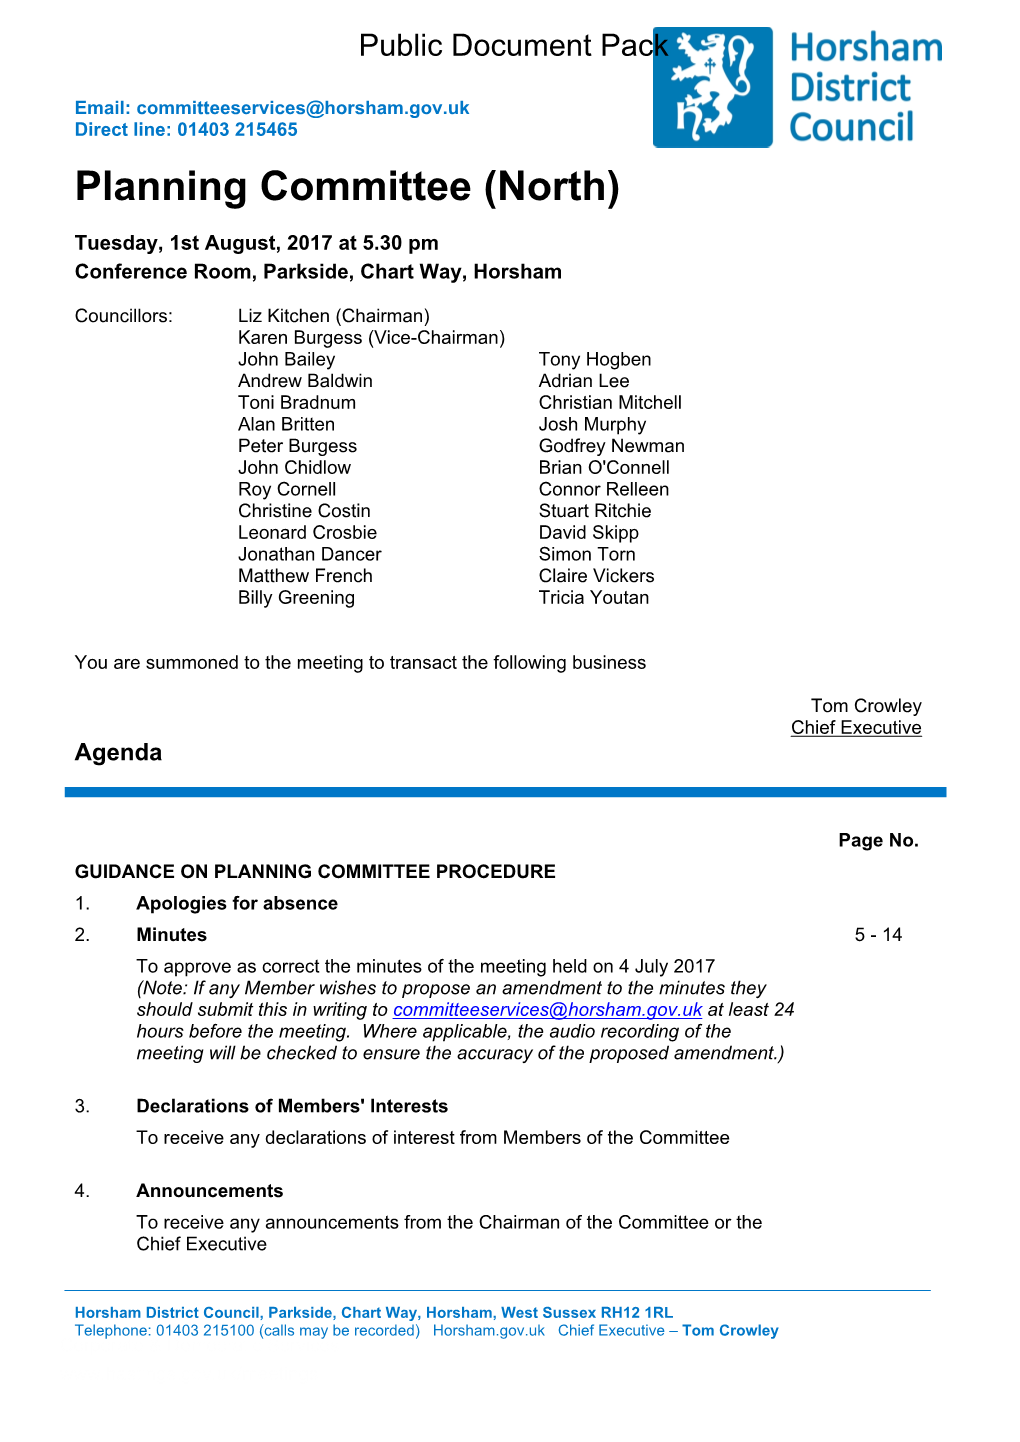 Public Pack)Agenda Document for Planning Committee (North